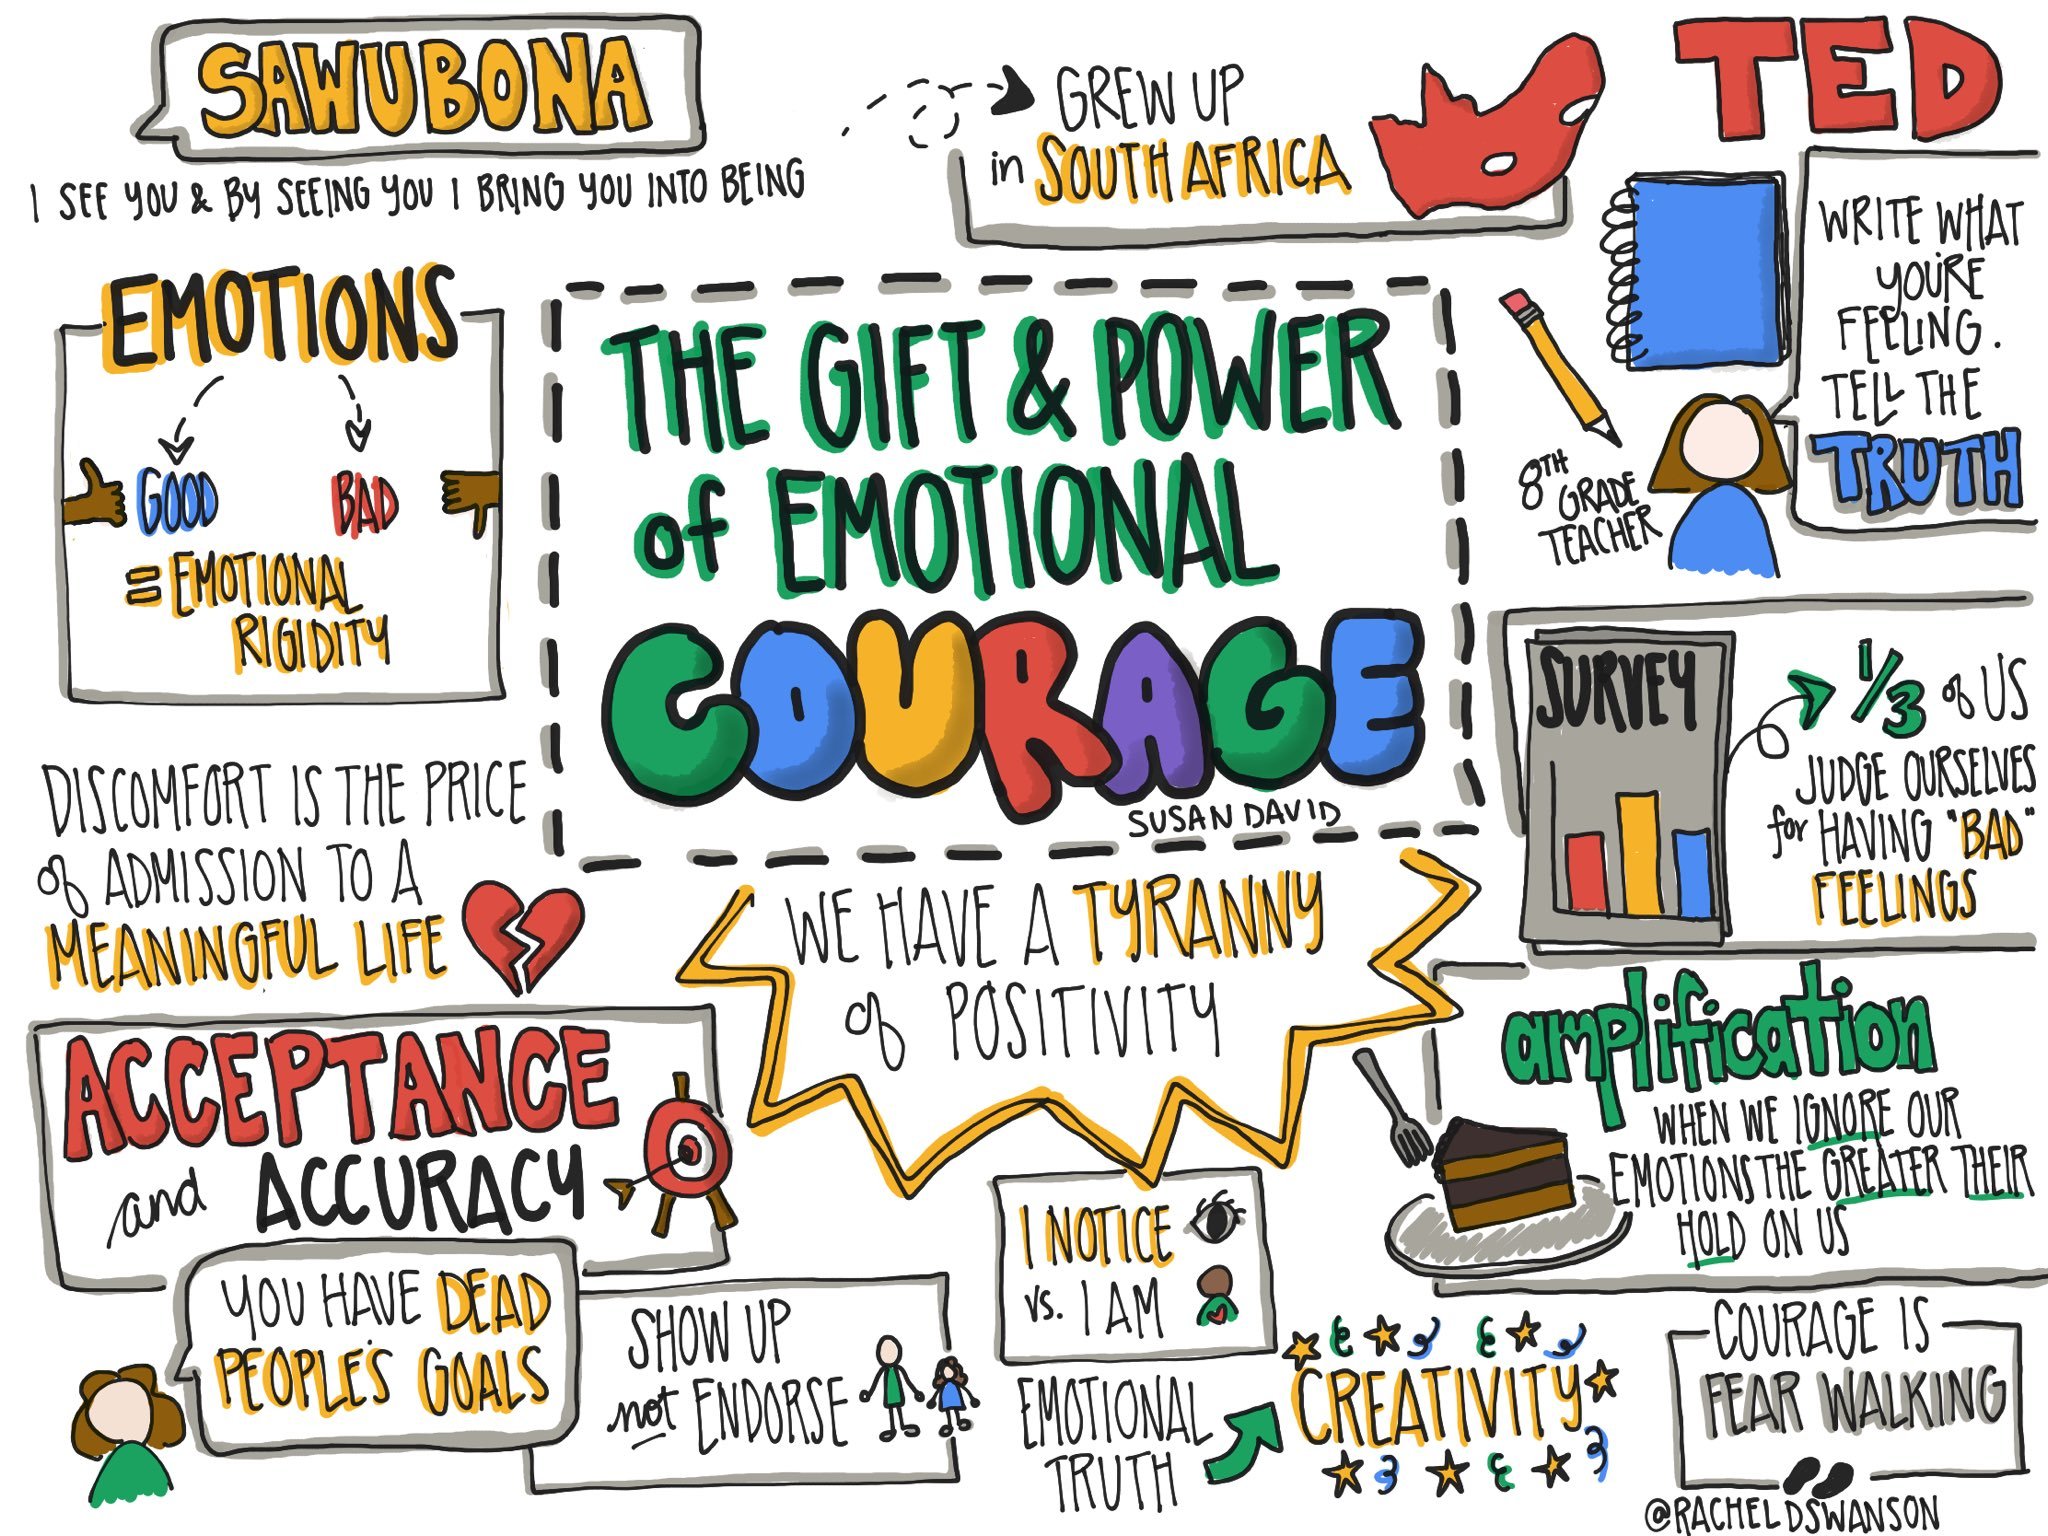 the gift and power of emotional courage.jpg